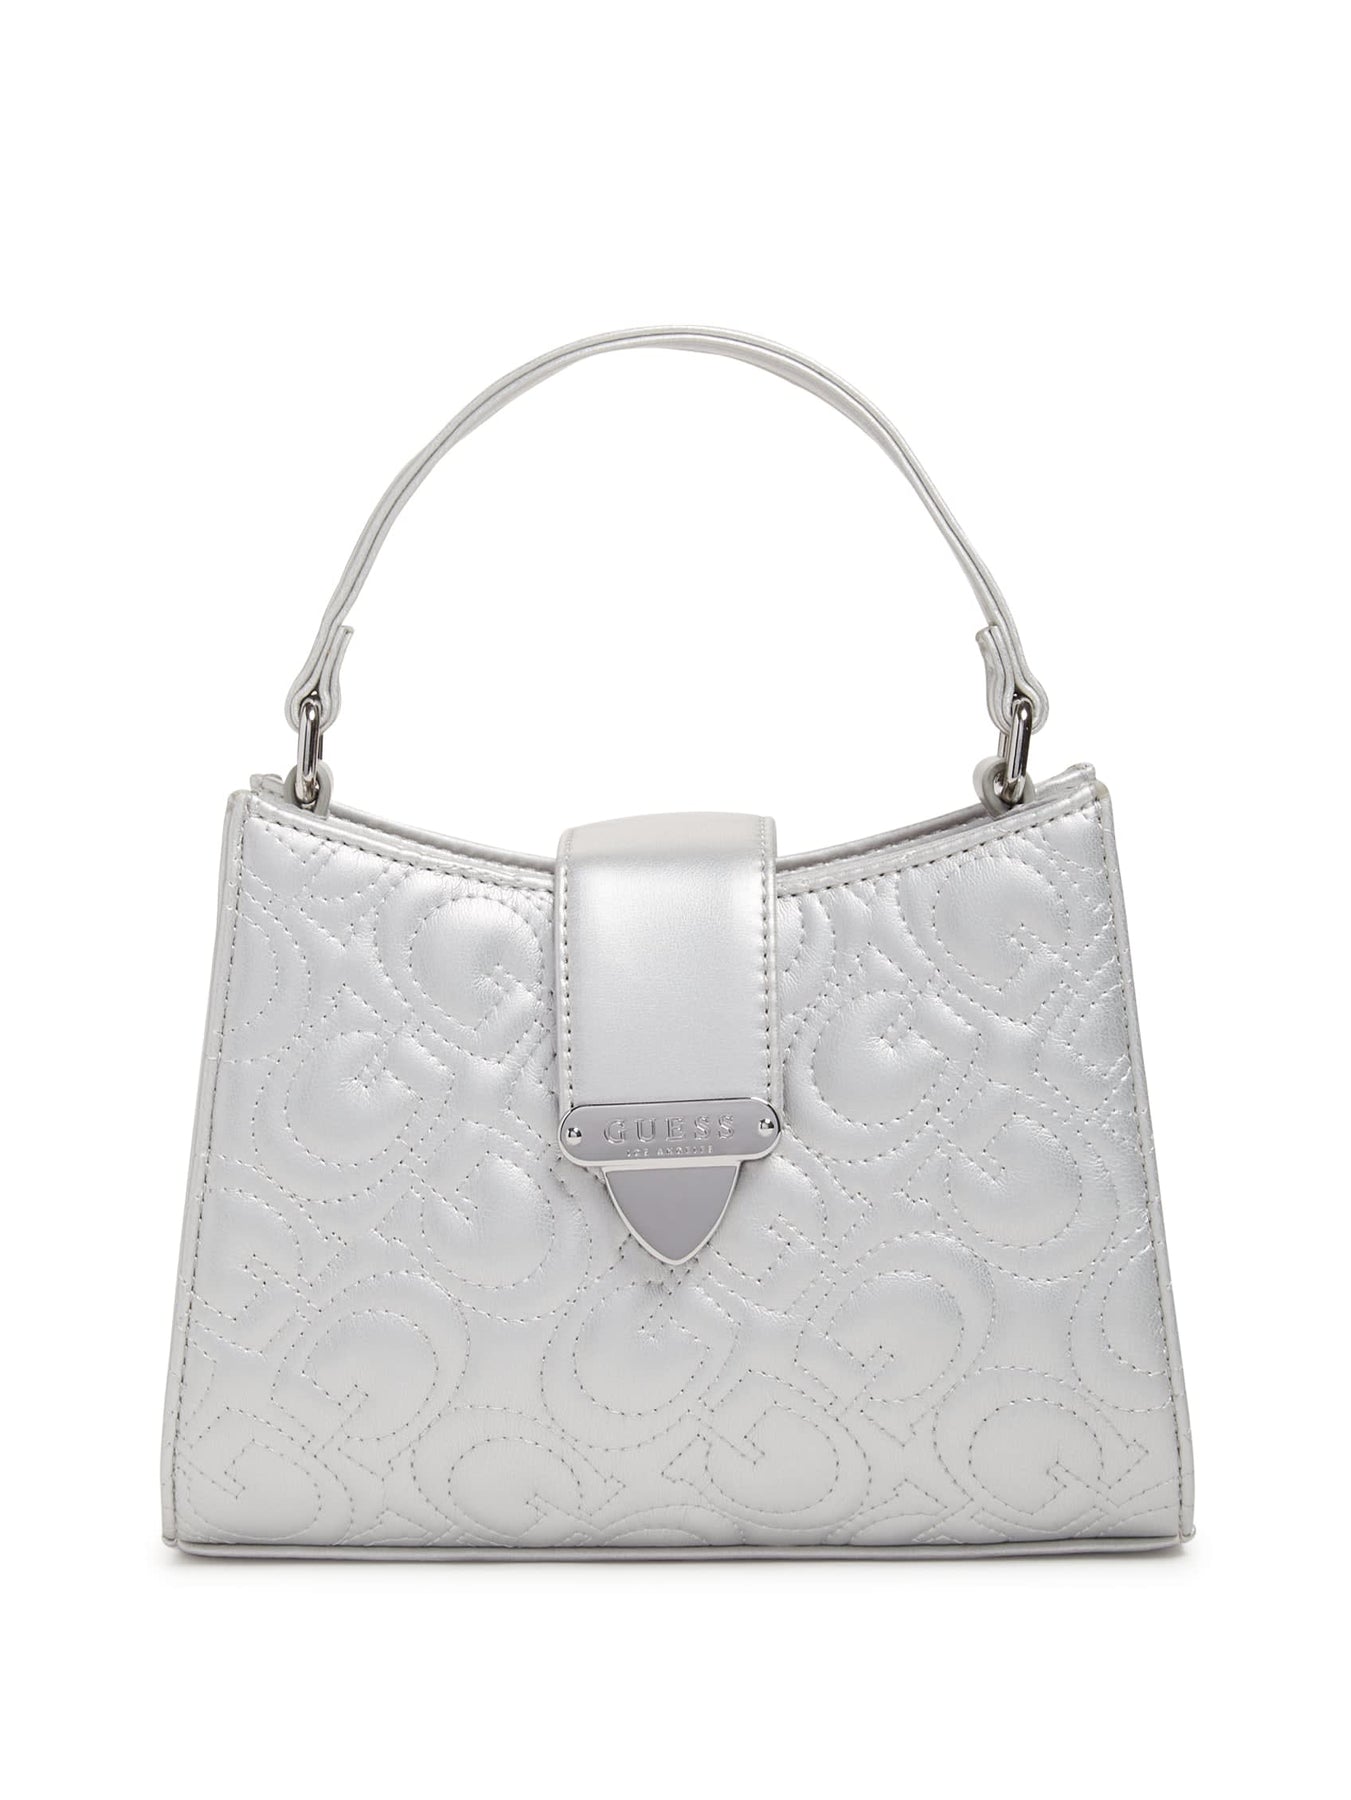 Guess Factory Tanyel Mini Crossbody | Shop Premium Outlets